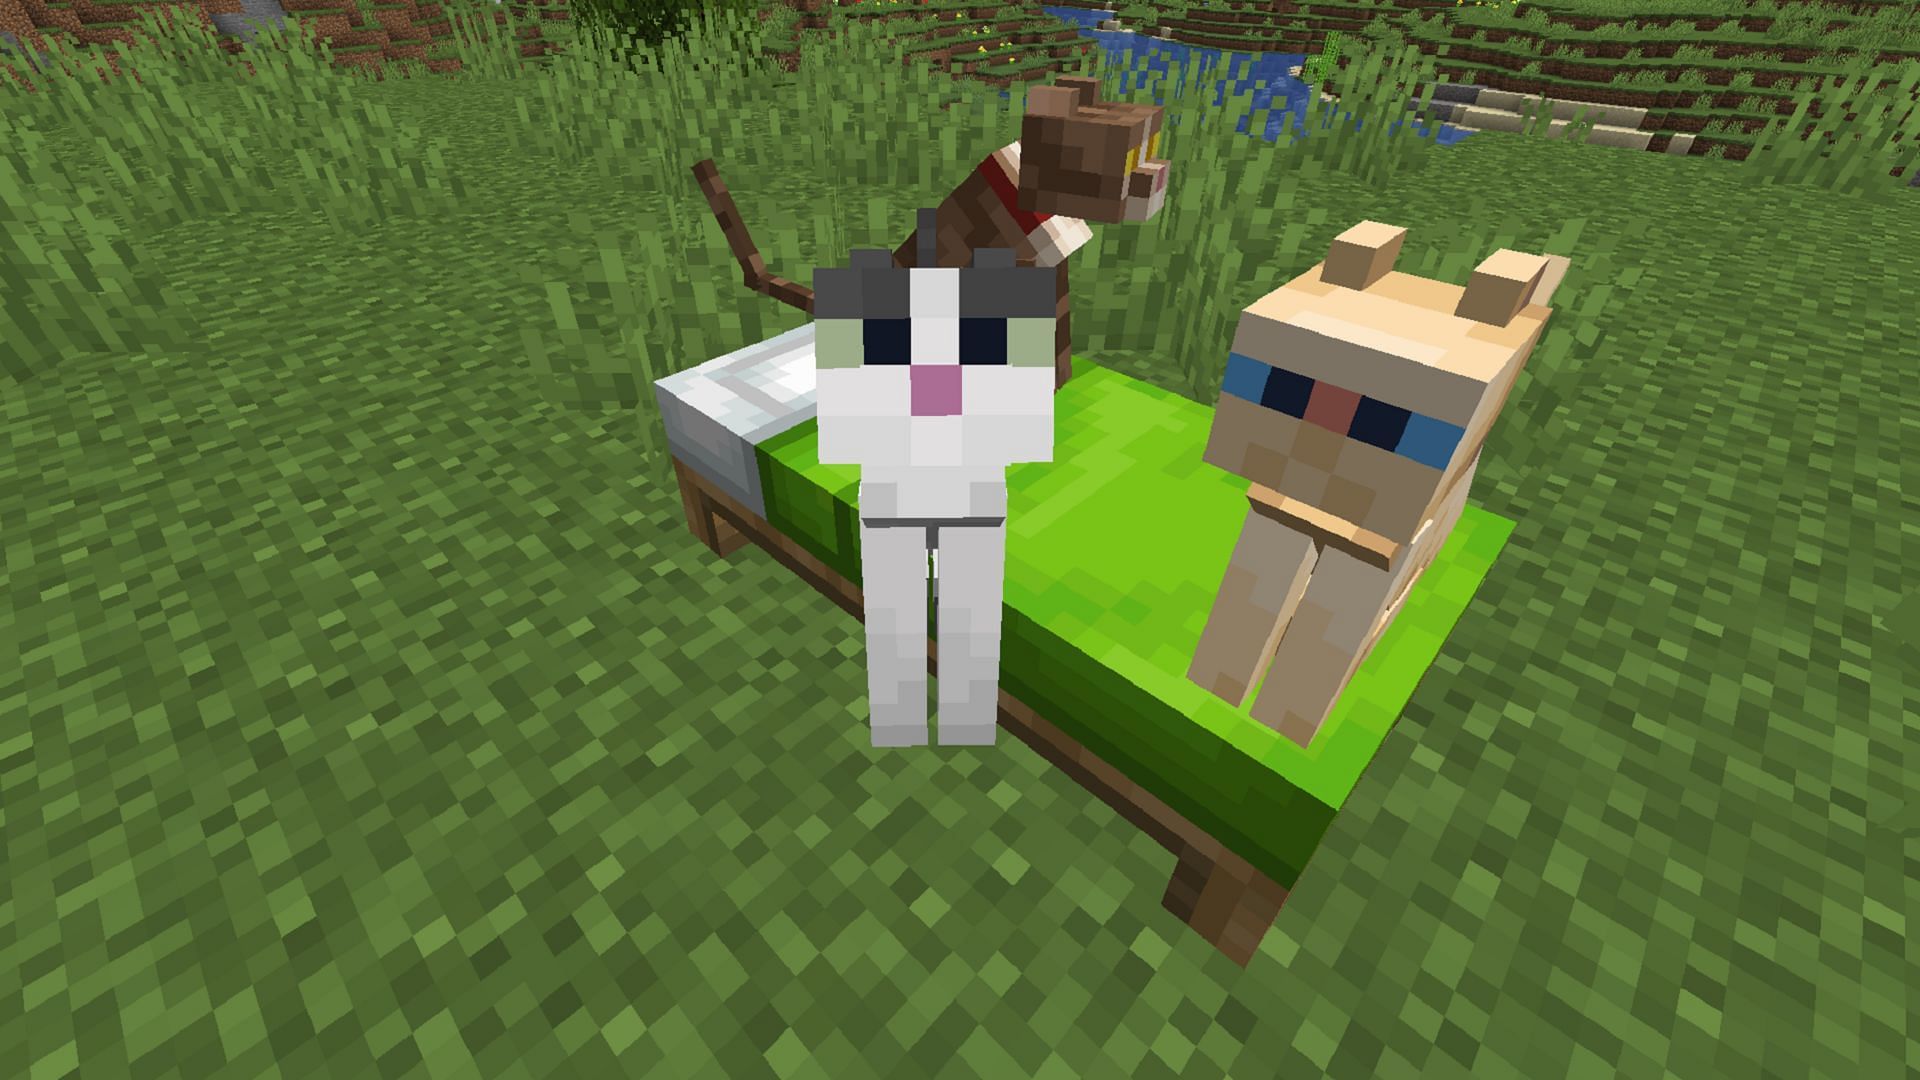 Cats already enjoy sitting on beds, but why not let them roam around beds a bit within reason? (Image via Mojang)